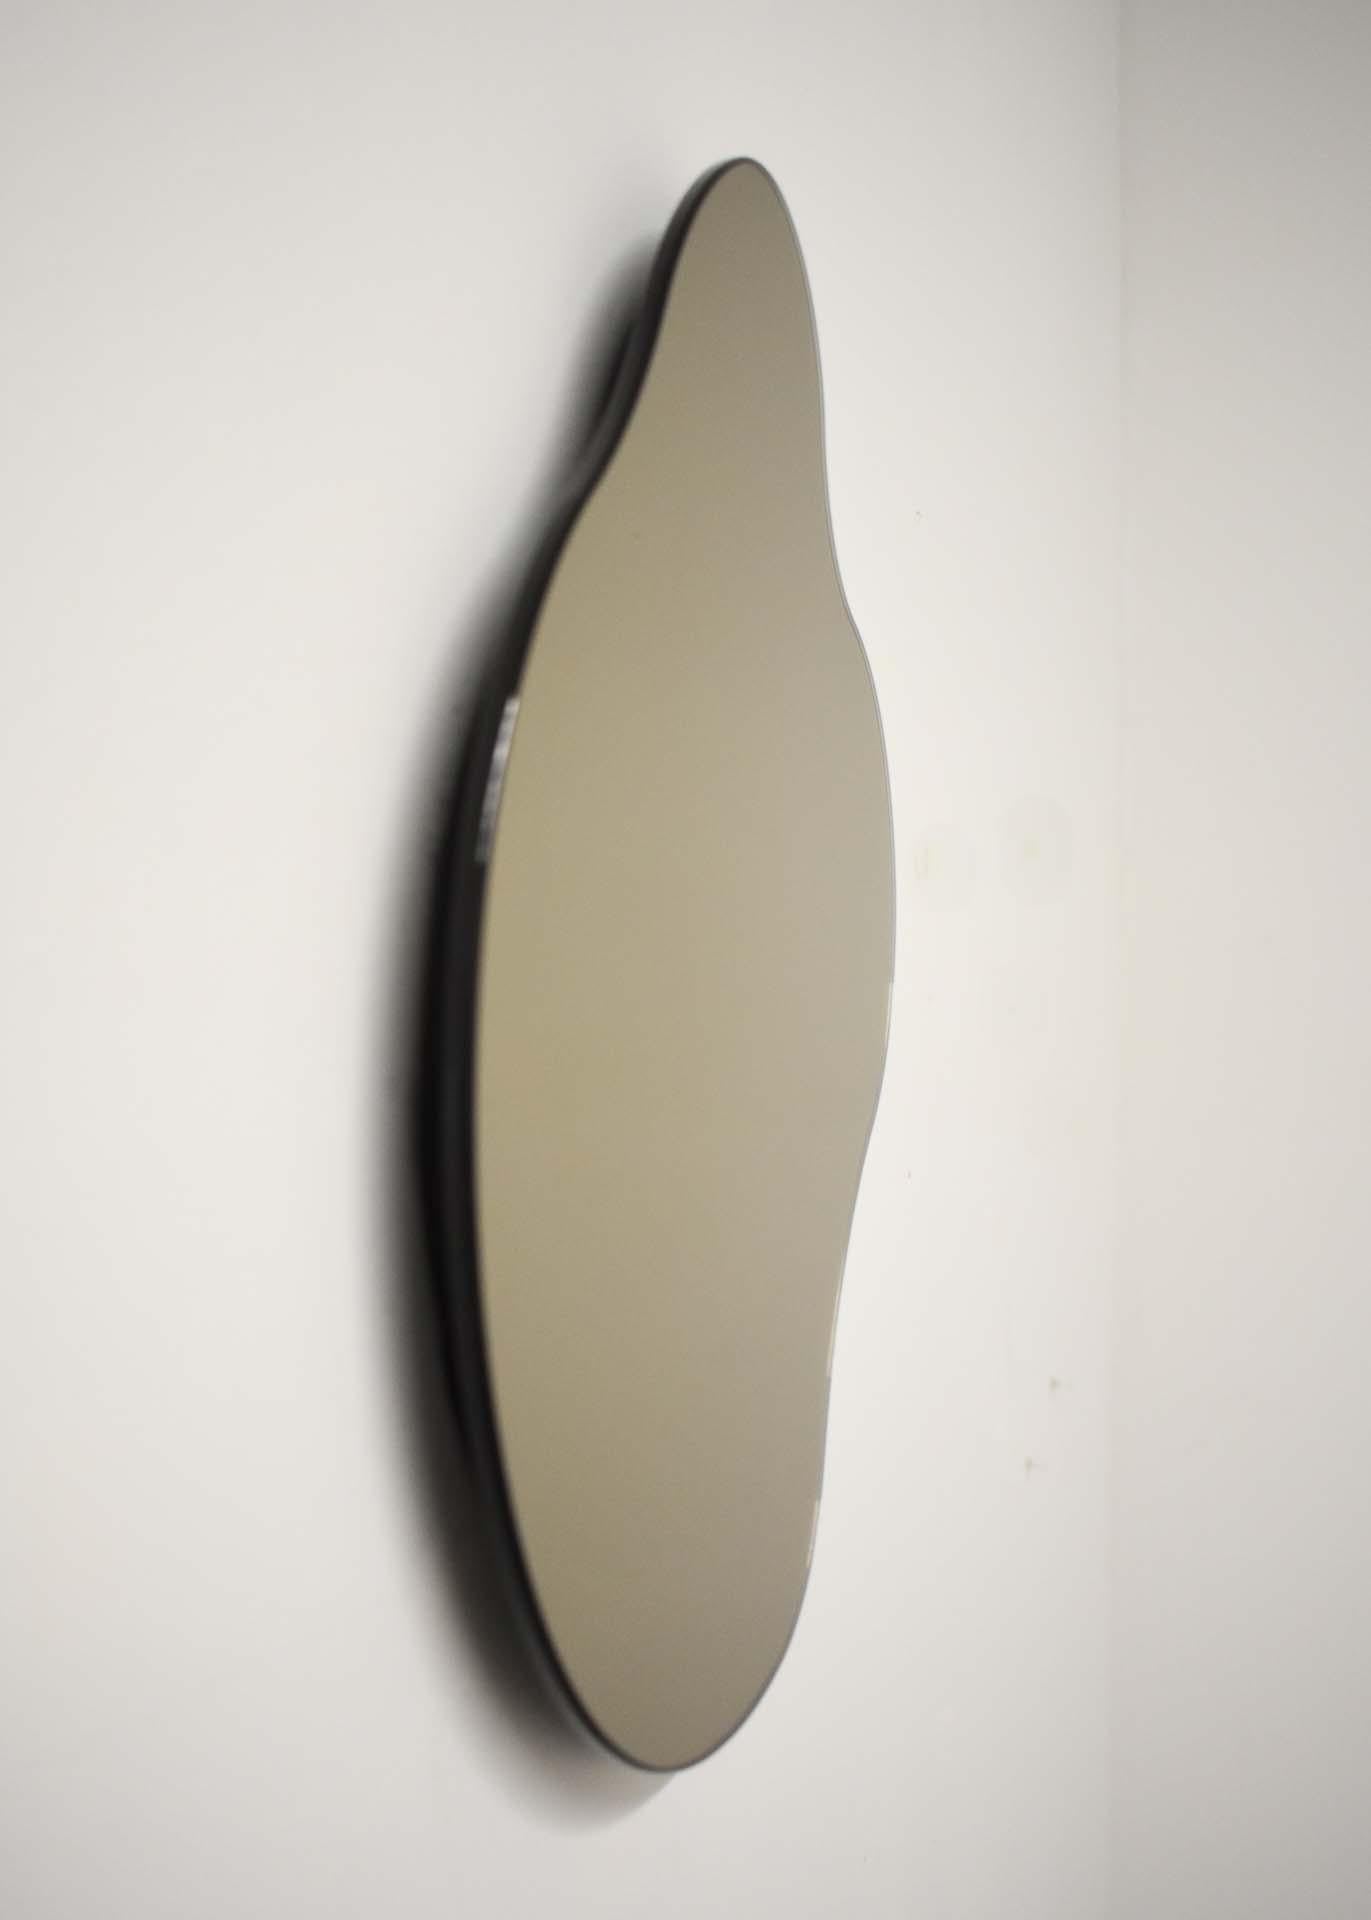 ISLA MIRROR - No. 3
Materials: Bronze Glass, Black MDF 
Dimensions: 13”W X 1”D X 15.25”H

Minimalist, elegant, amorphically shaped floating bronze glass mirrors inspired by the topography of the Philippine archipelago. The ISLA Mirrors are available